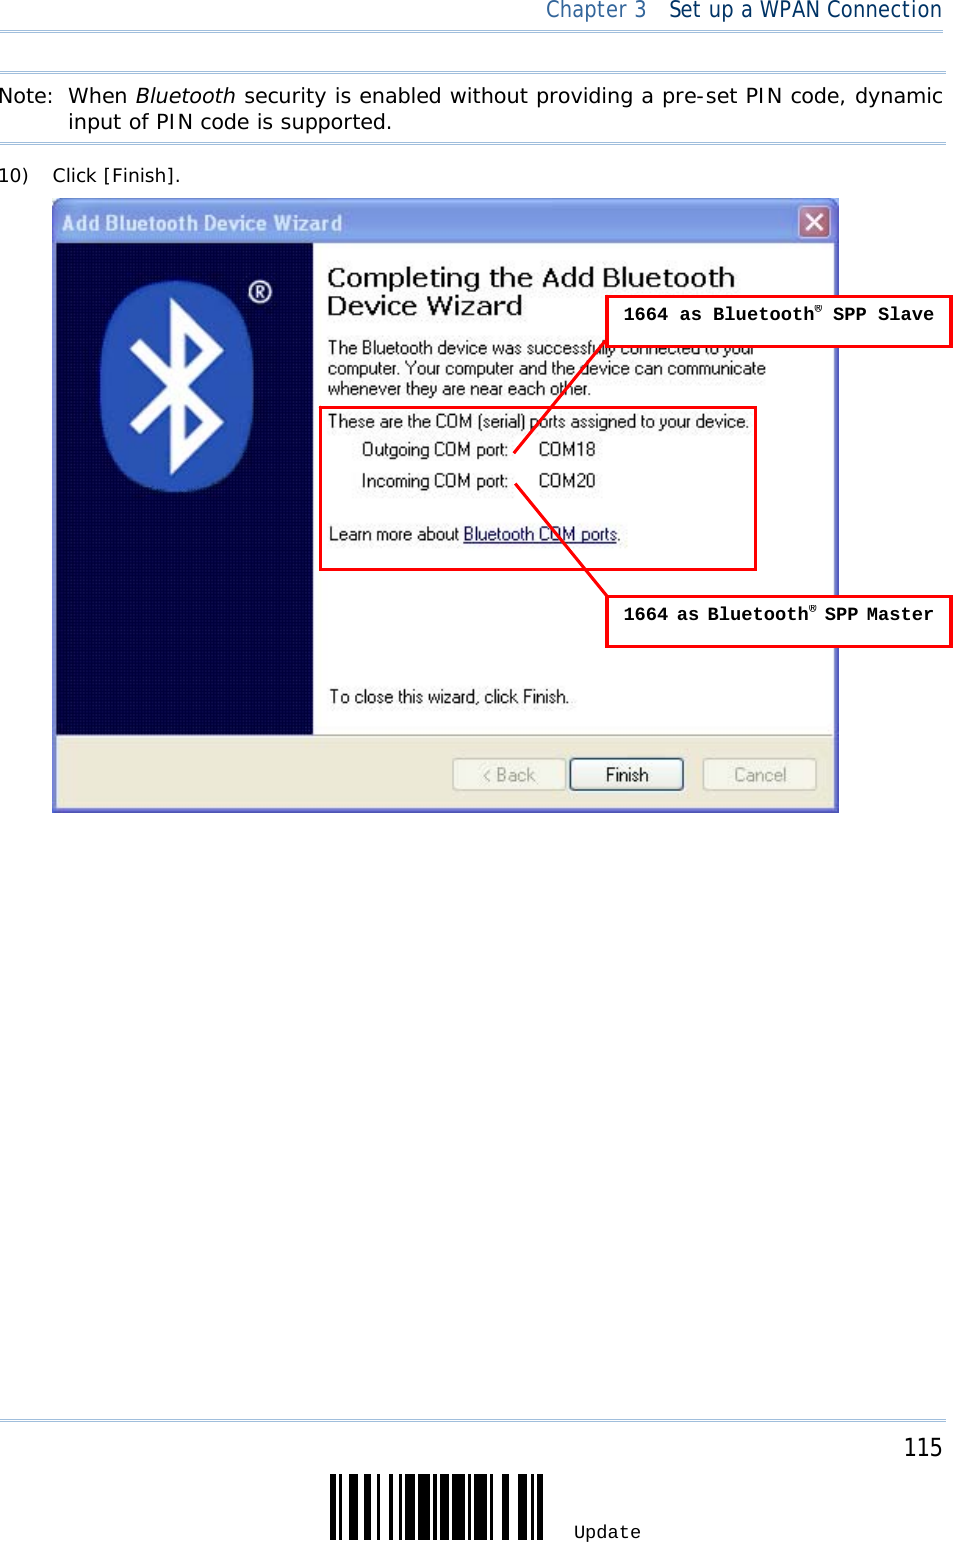     115 Update  Chapter 3  Set up a WPAN Connection Note: When Bluetooth security is enabled without providing a pre-set PIN code, dynamic input of PIN code is supported. 10) Click [Finish].                             1664 as Bluetooth® SPP Slave1664 as Bluetooth® SPP Master